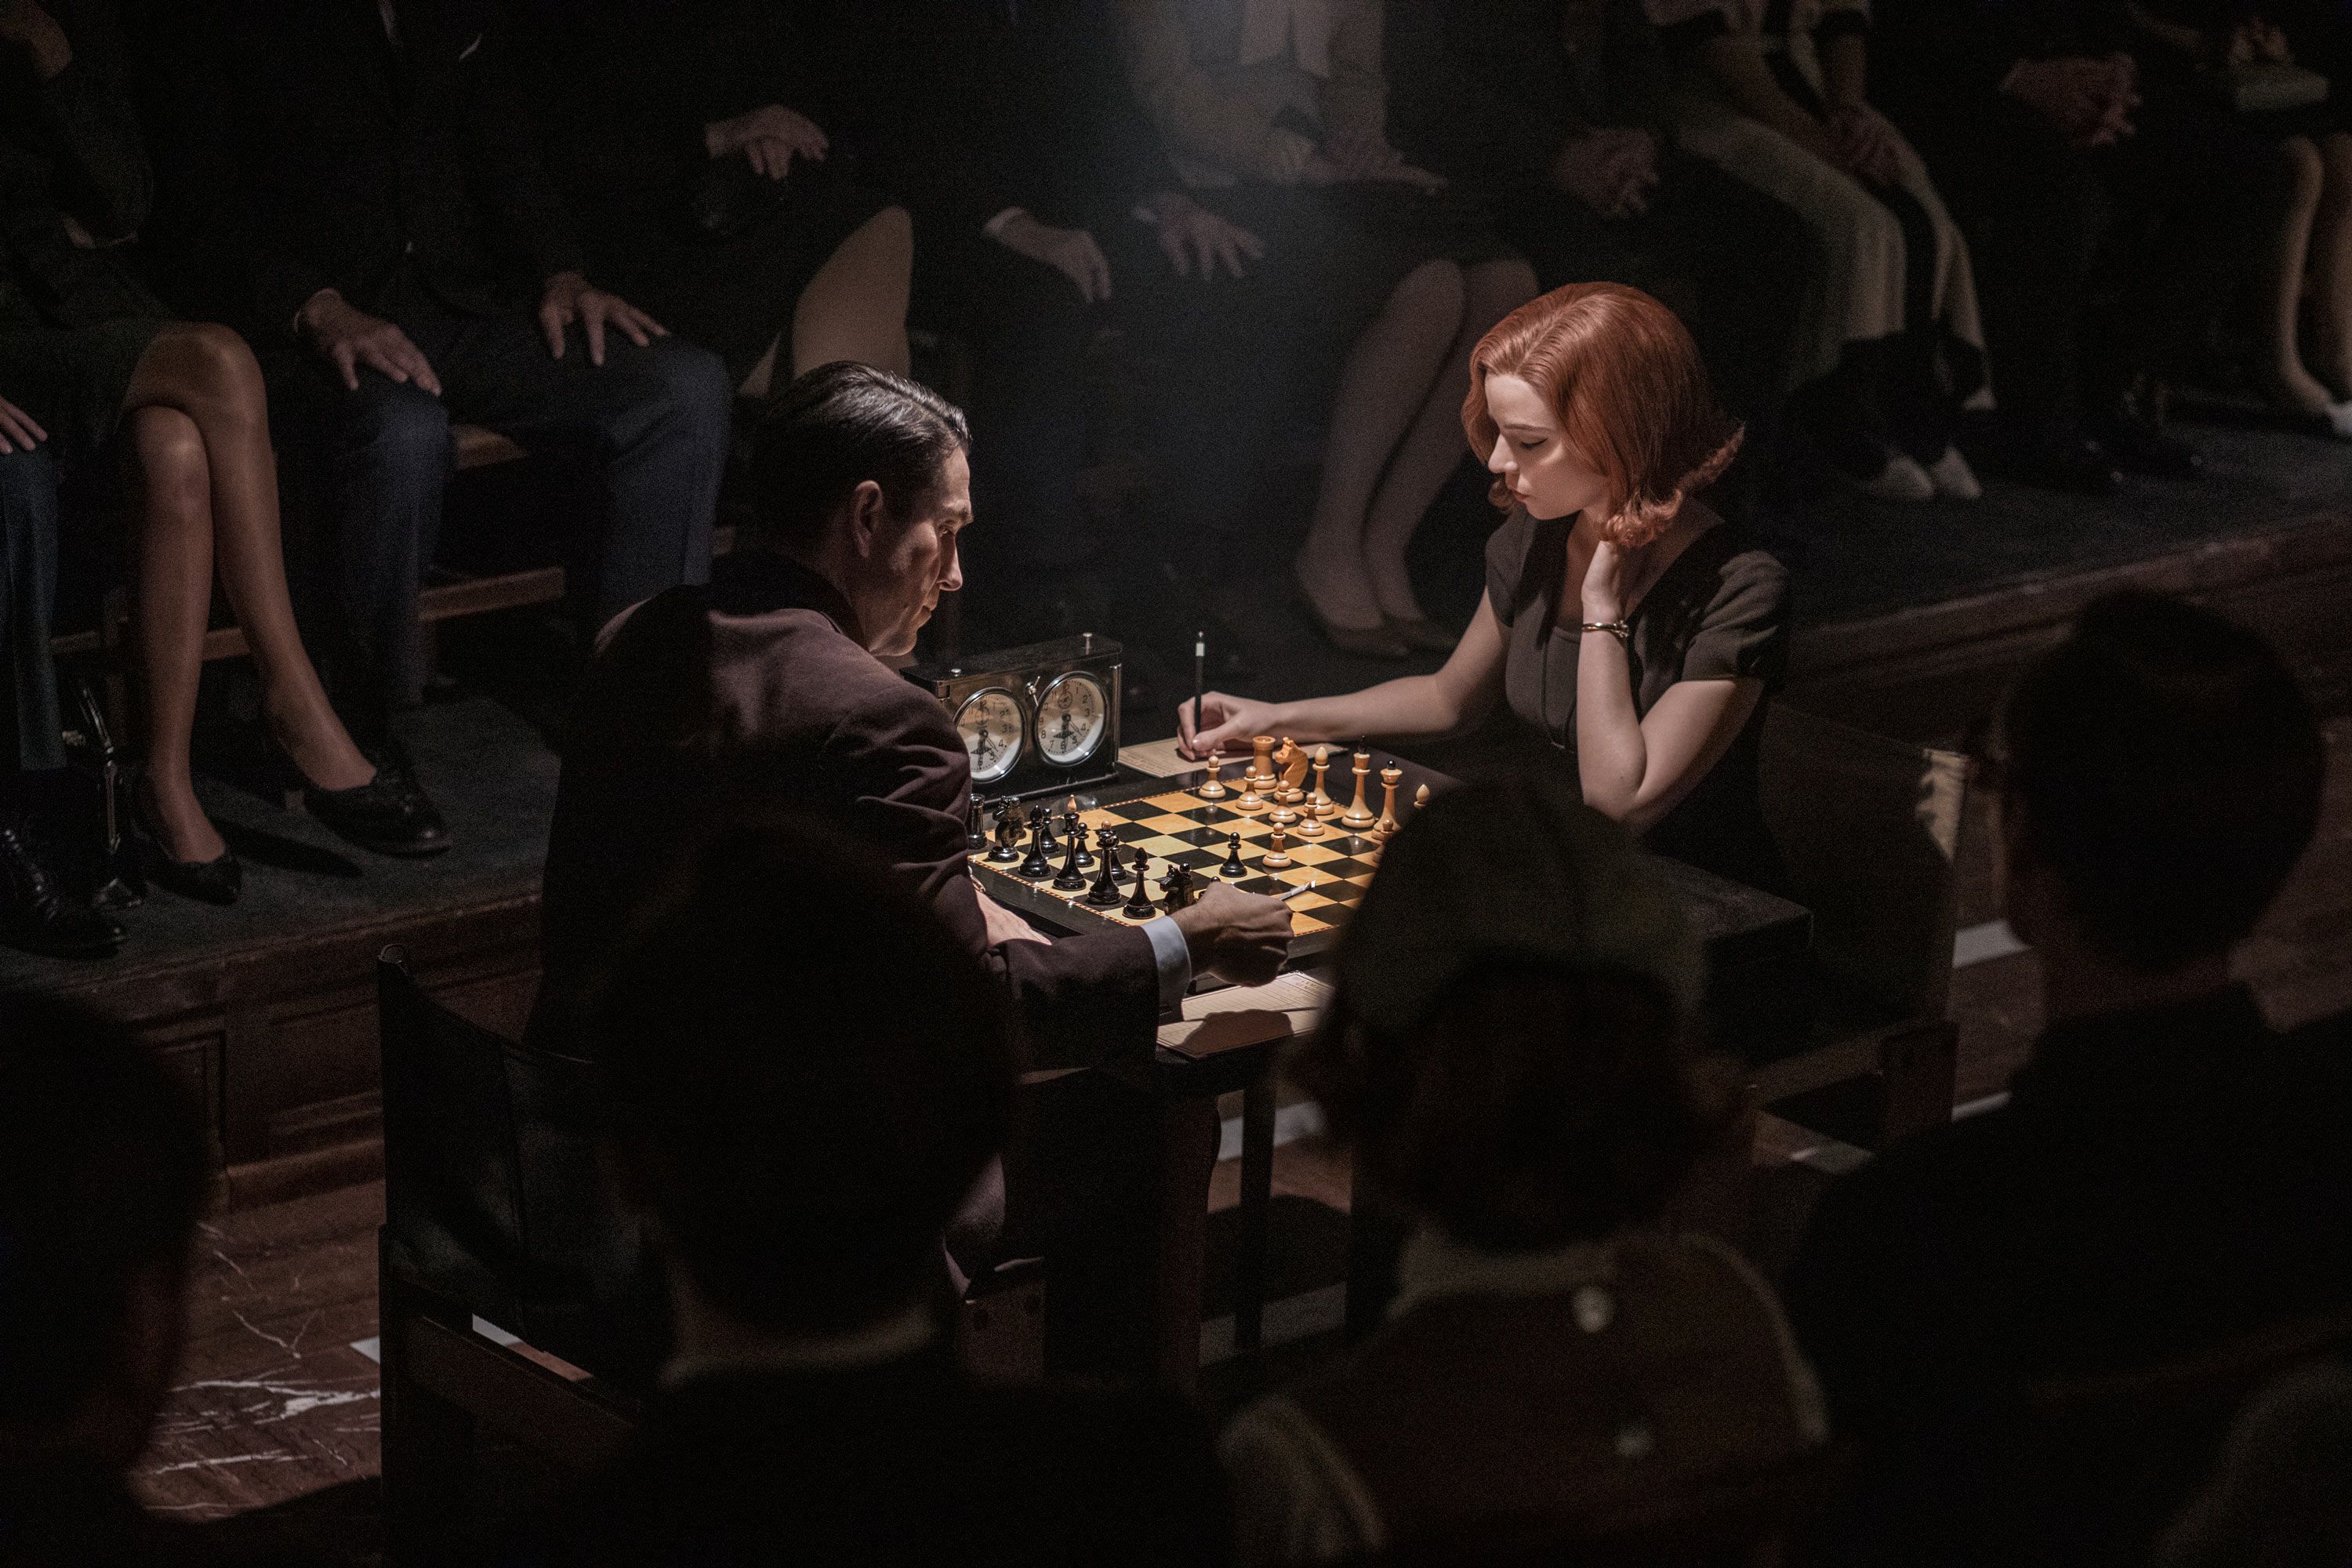 Netflix's 'The Queen's Gambit' sparks chess frenzy, websites